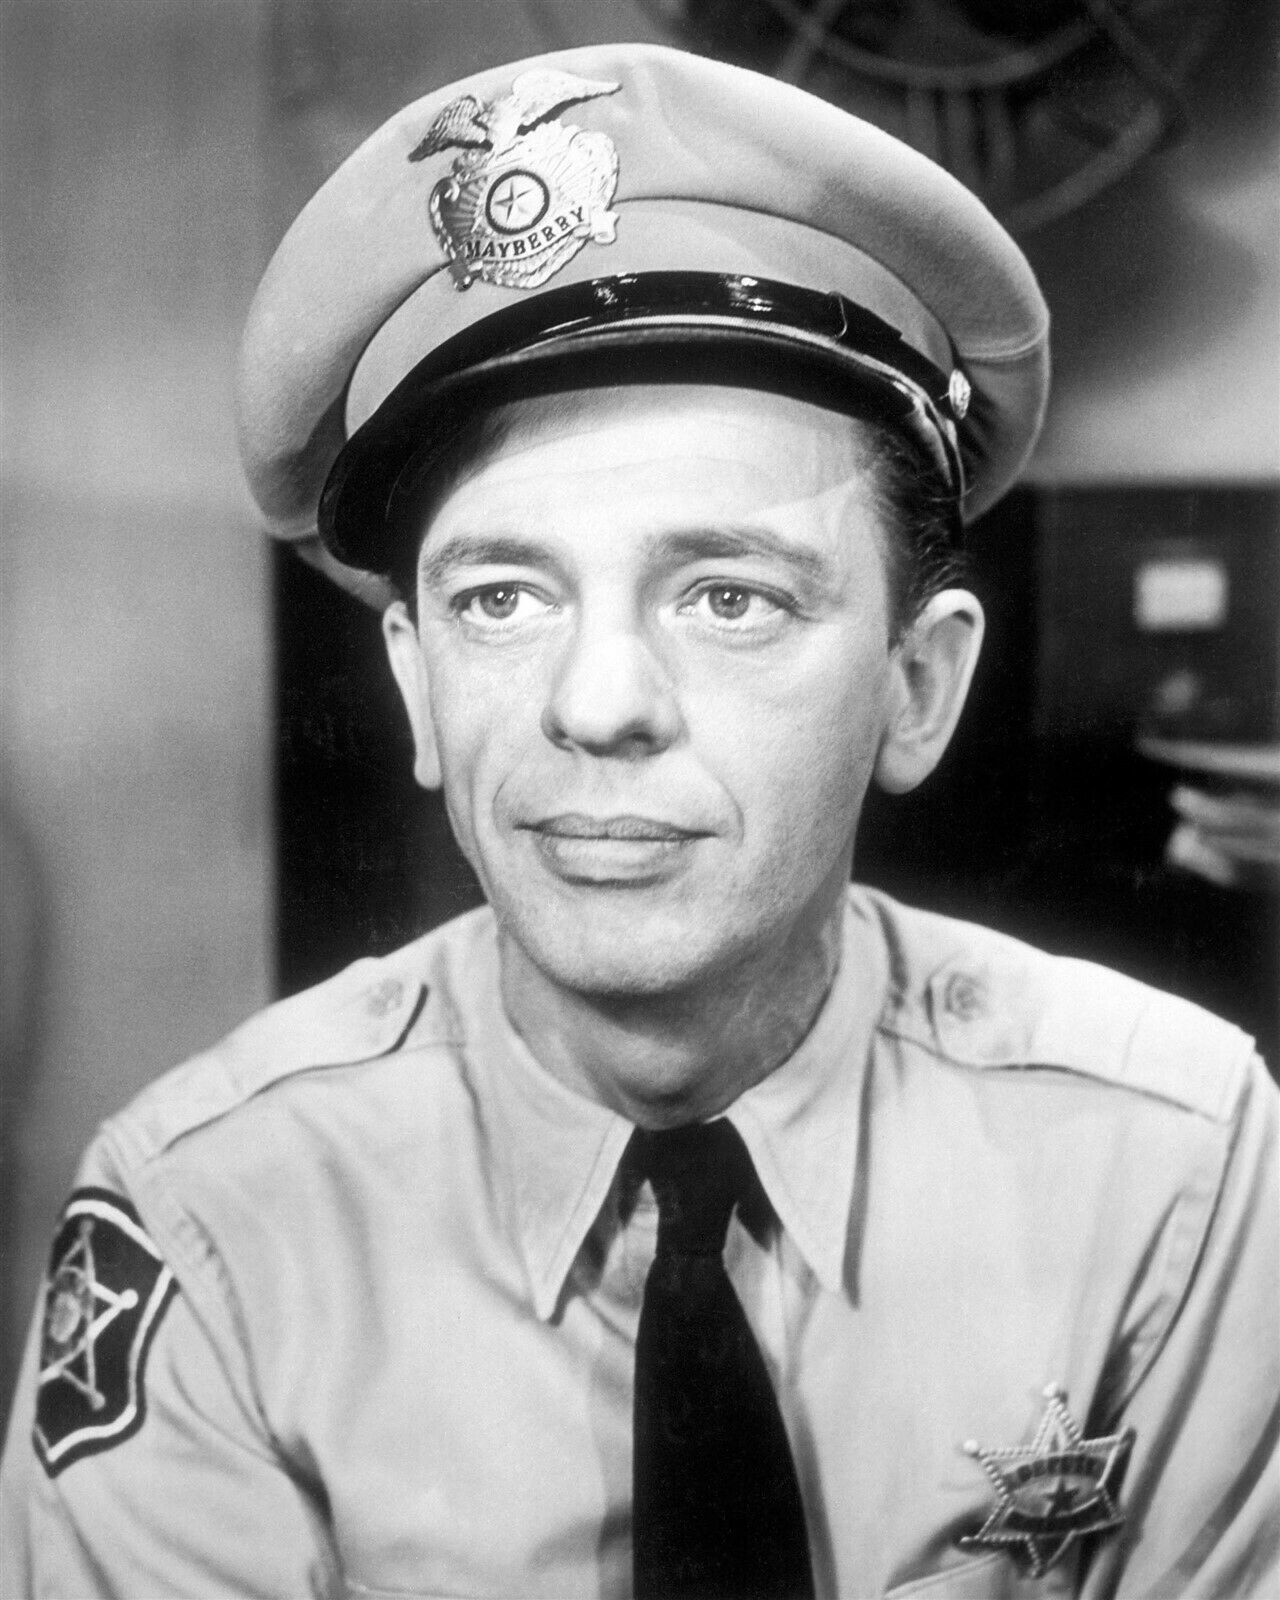 Don Knotts As Barney Fife In Police Uniform Andy Griffith Show 8x10 Inch Photo Everything Else